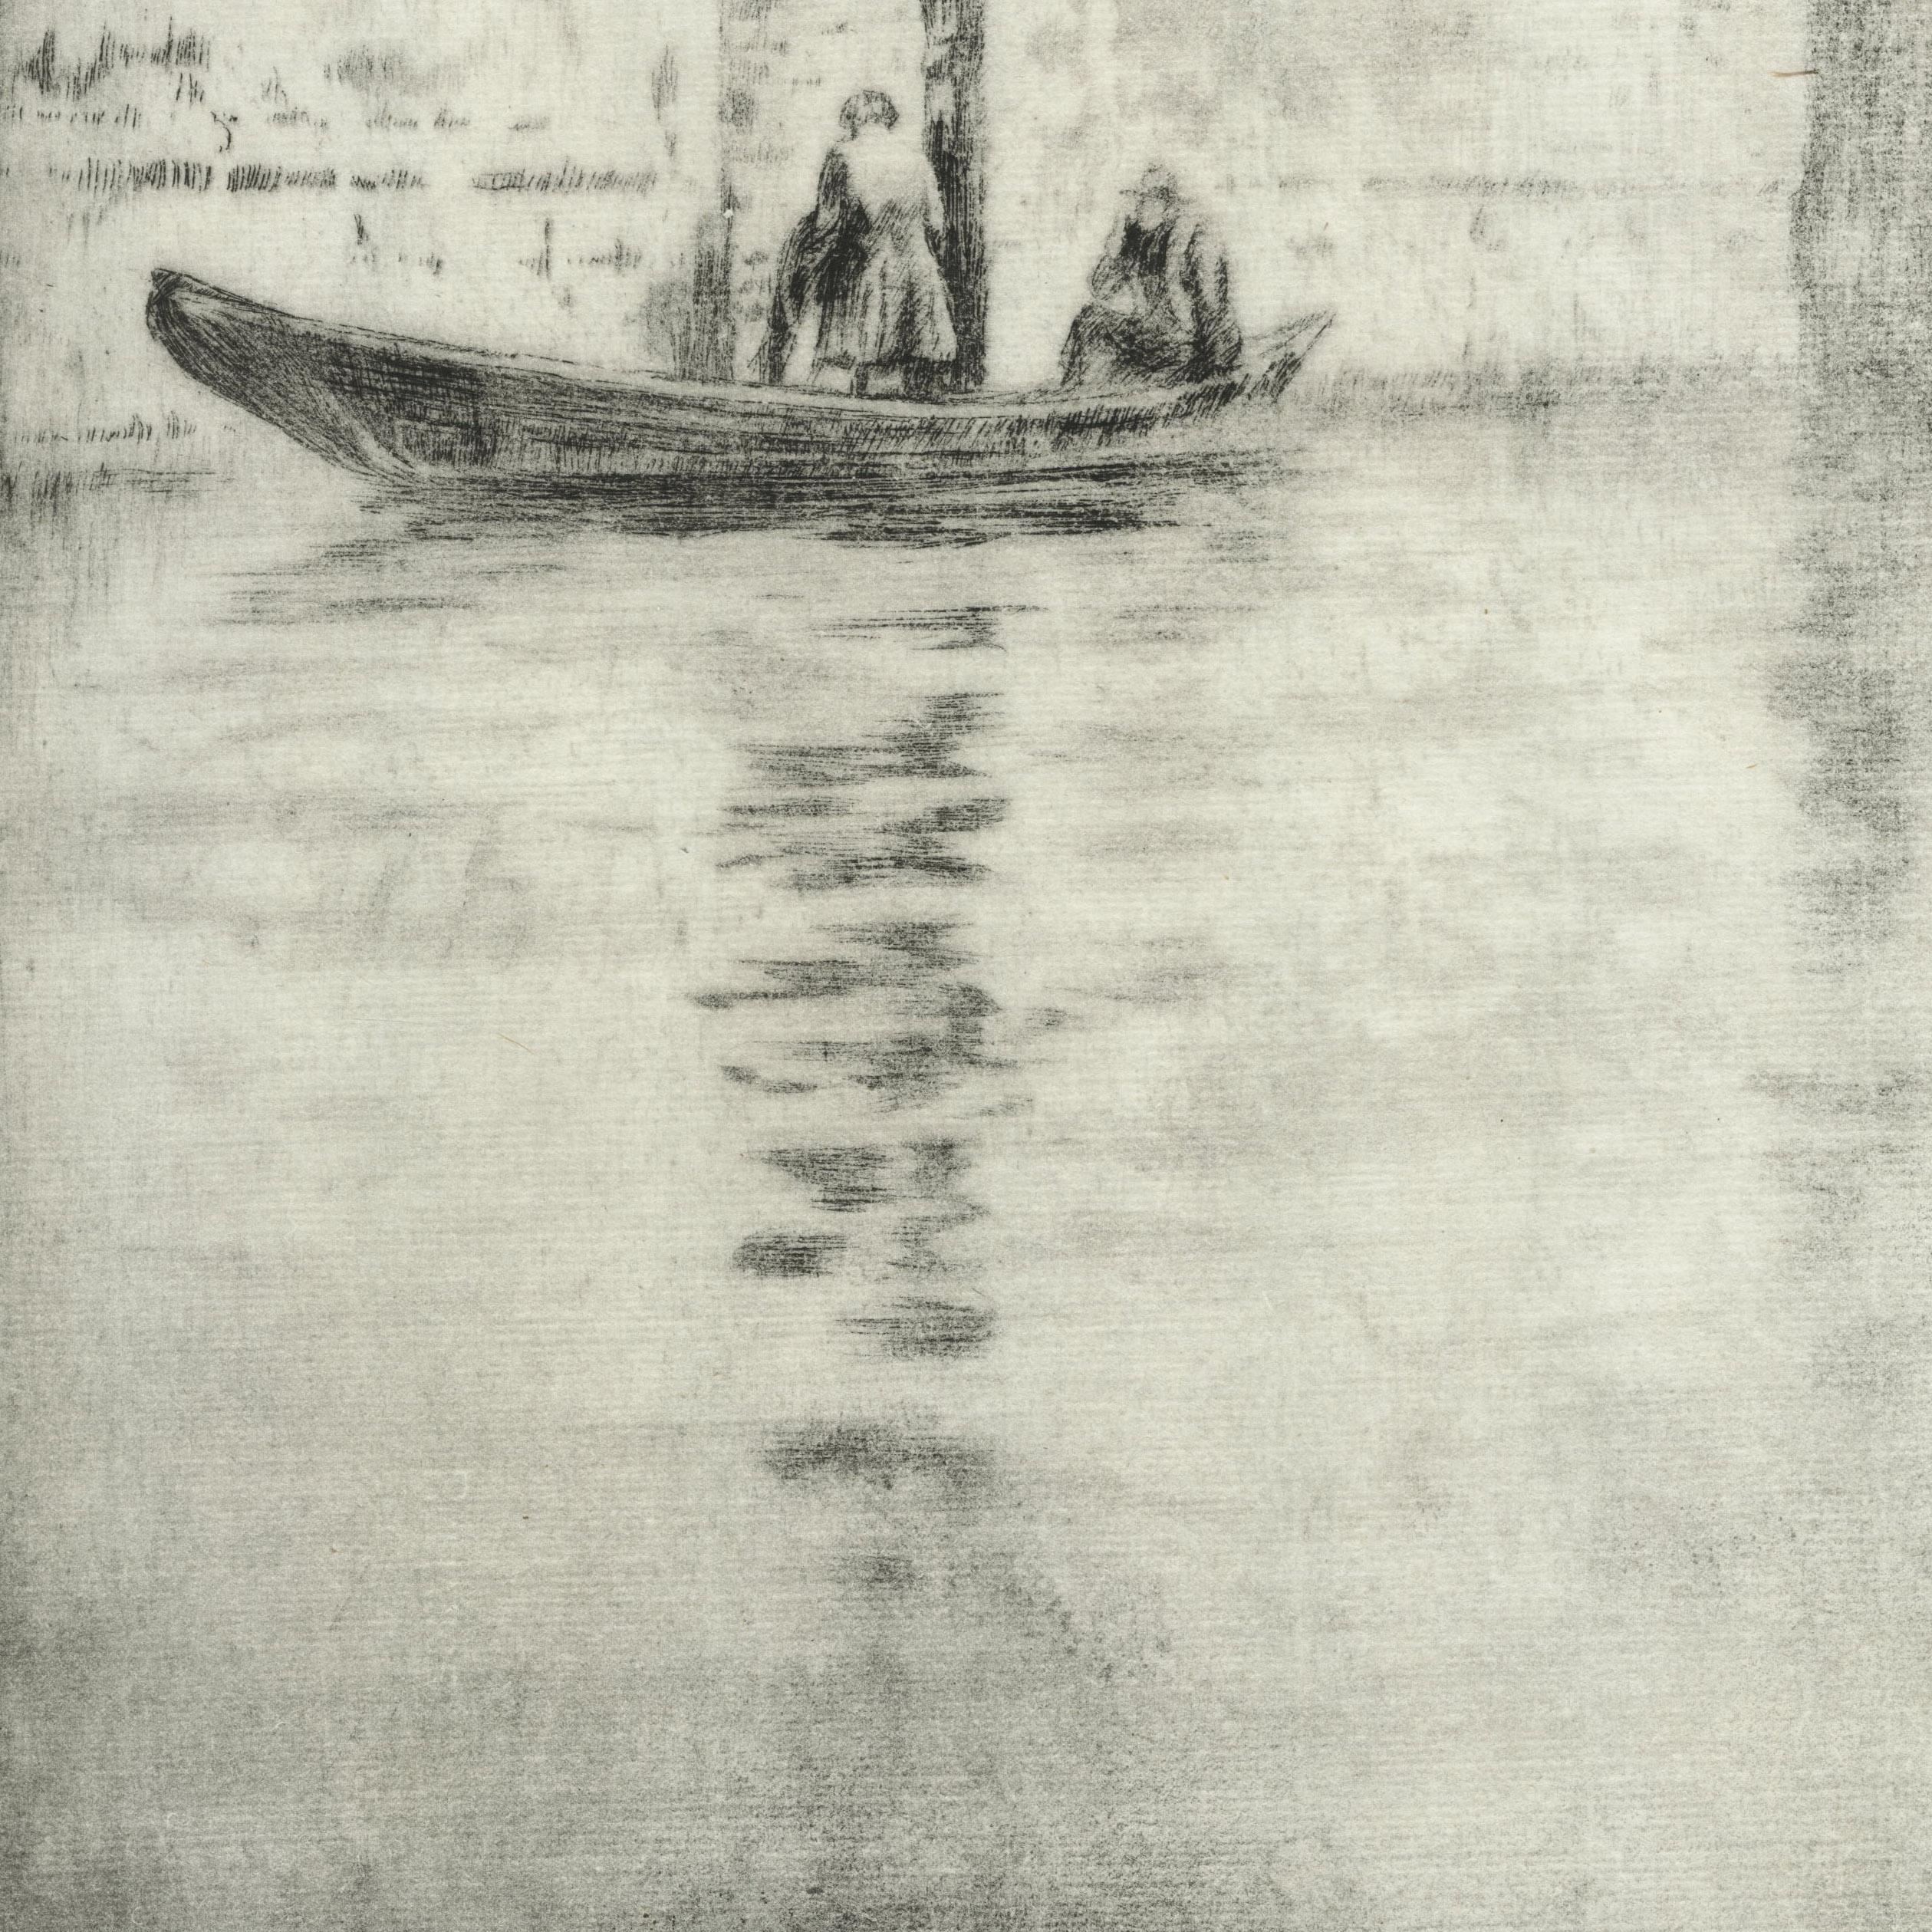 Untitled (Venice canal, man departing the gondola) - American Impressionist Print by Levon West